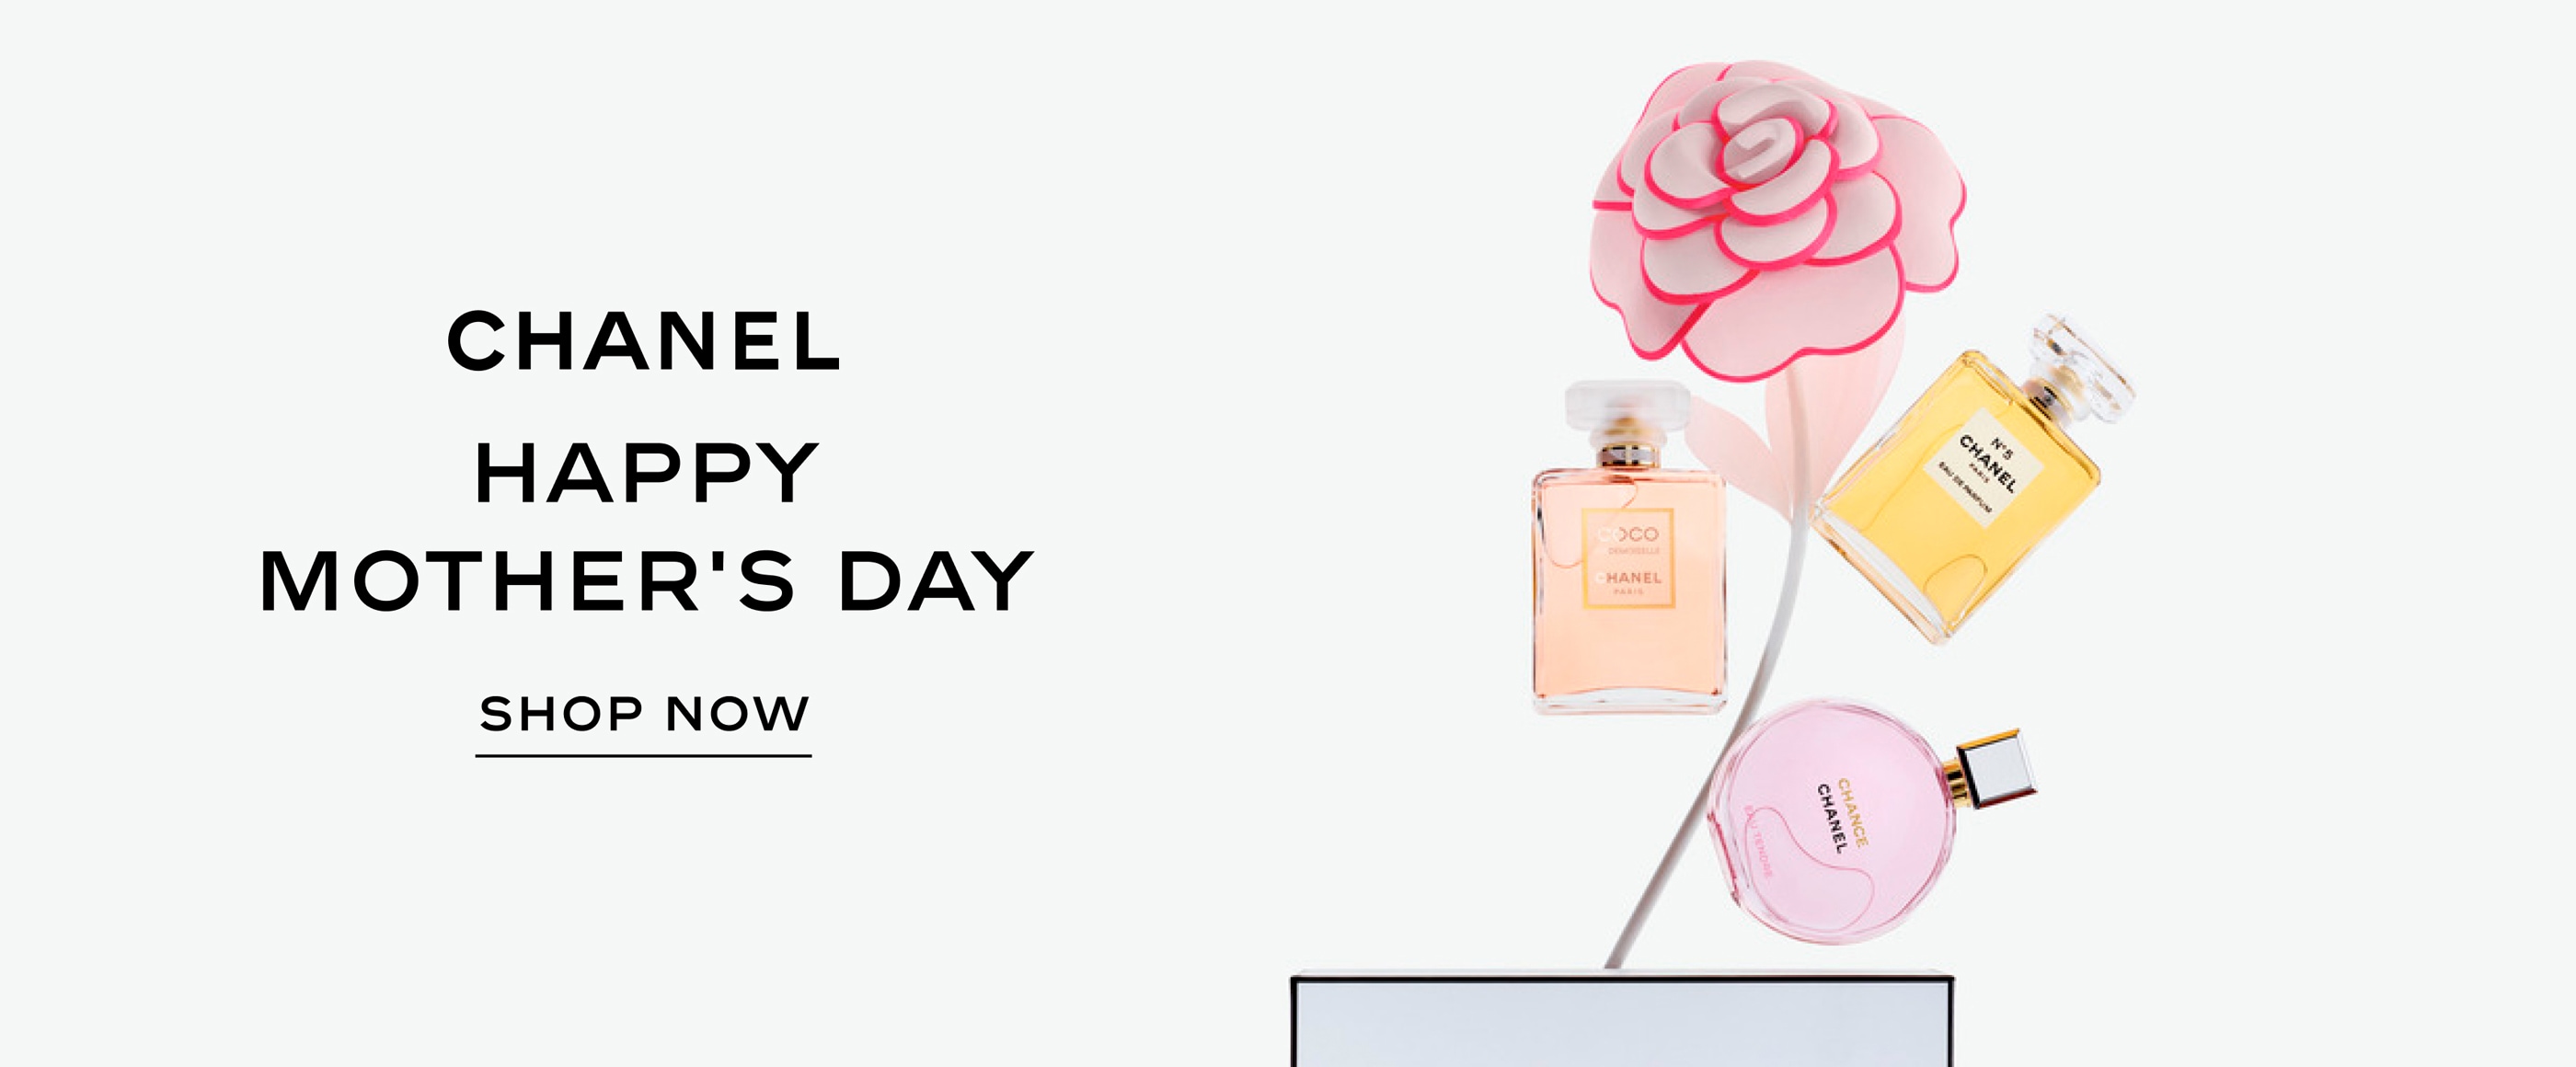 CHANEL Happy Mother's Day